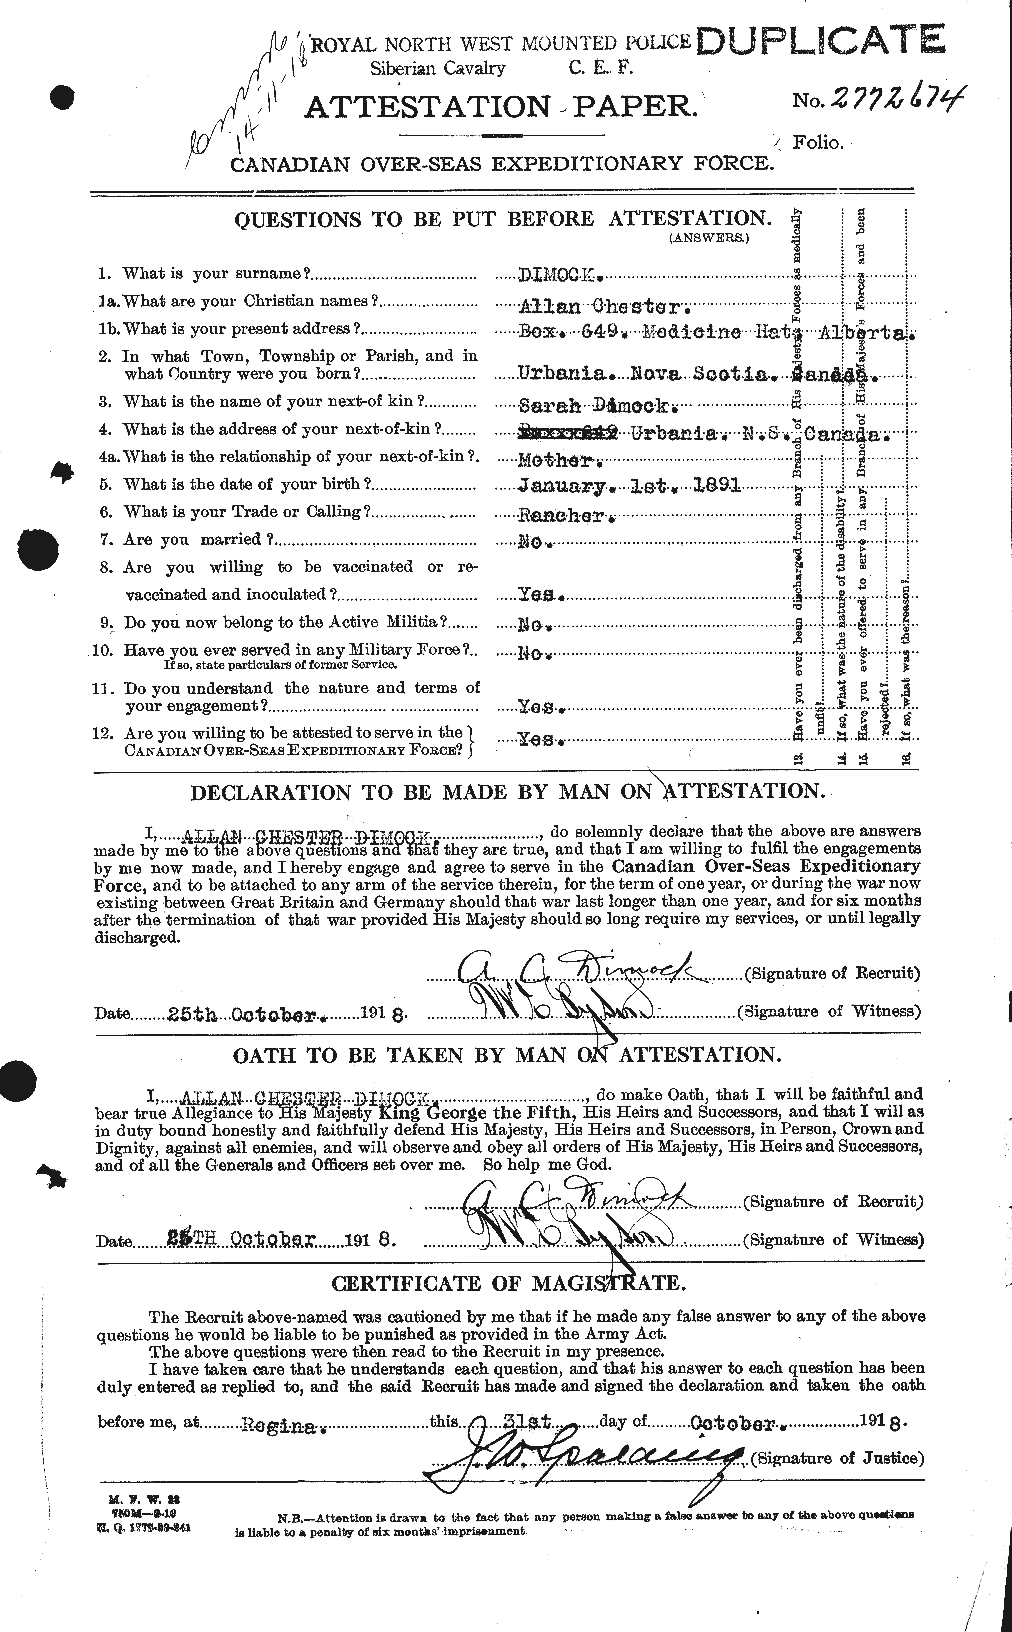 Personnel Records of the First World War - CEF 293838a